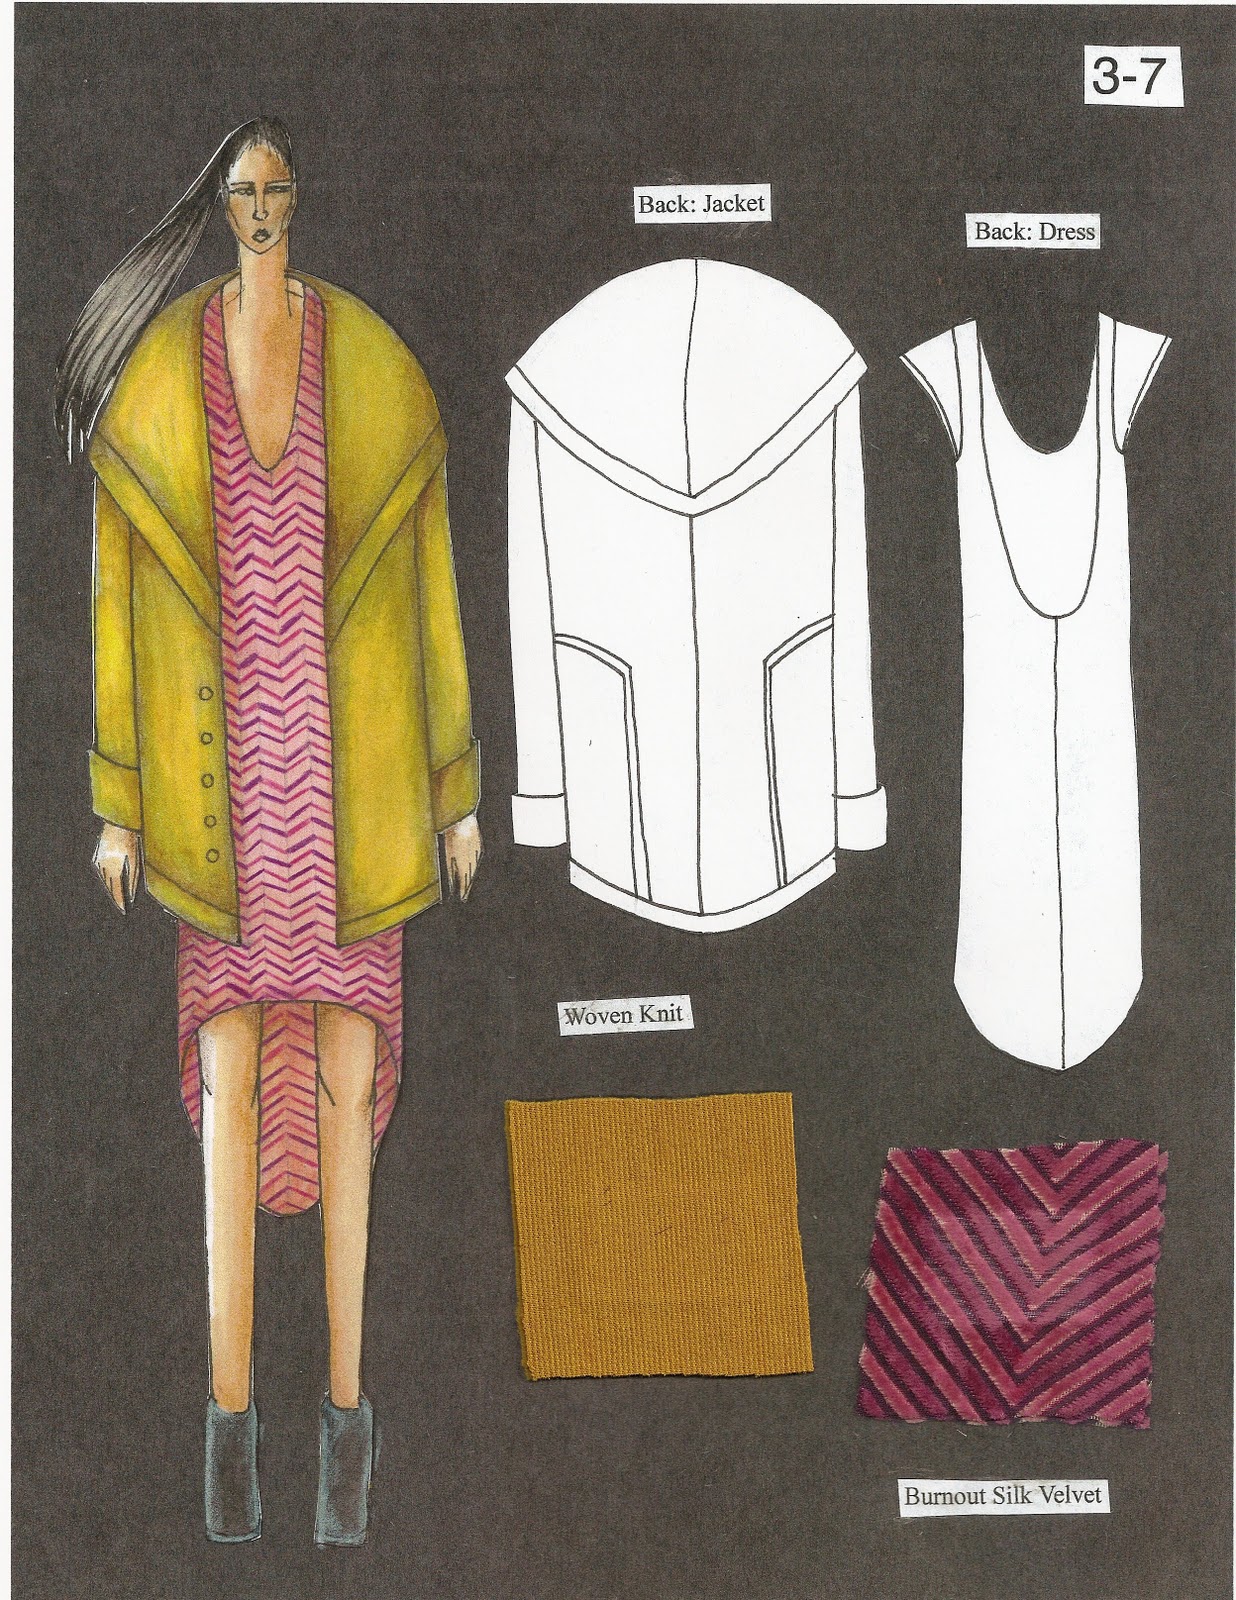 MY VISUAL PLEASURES.: ACCEPTED: Fashion Institute of Technology